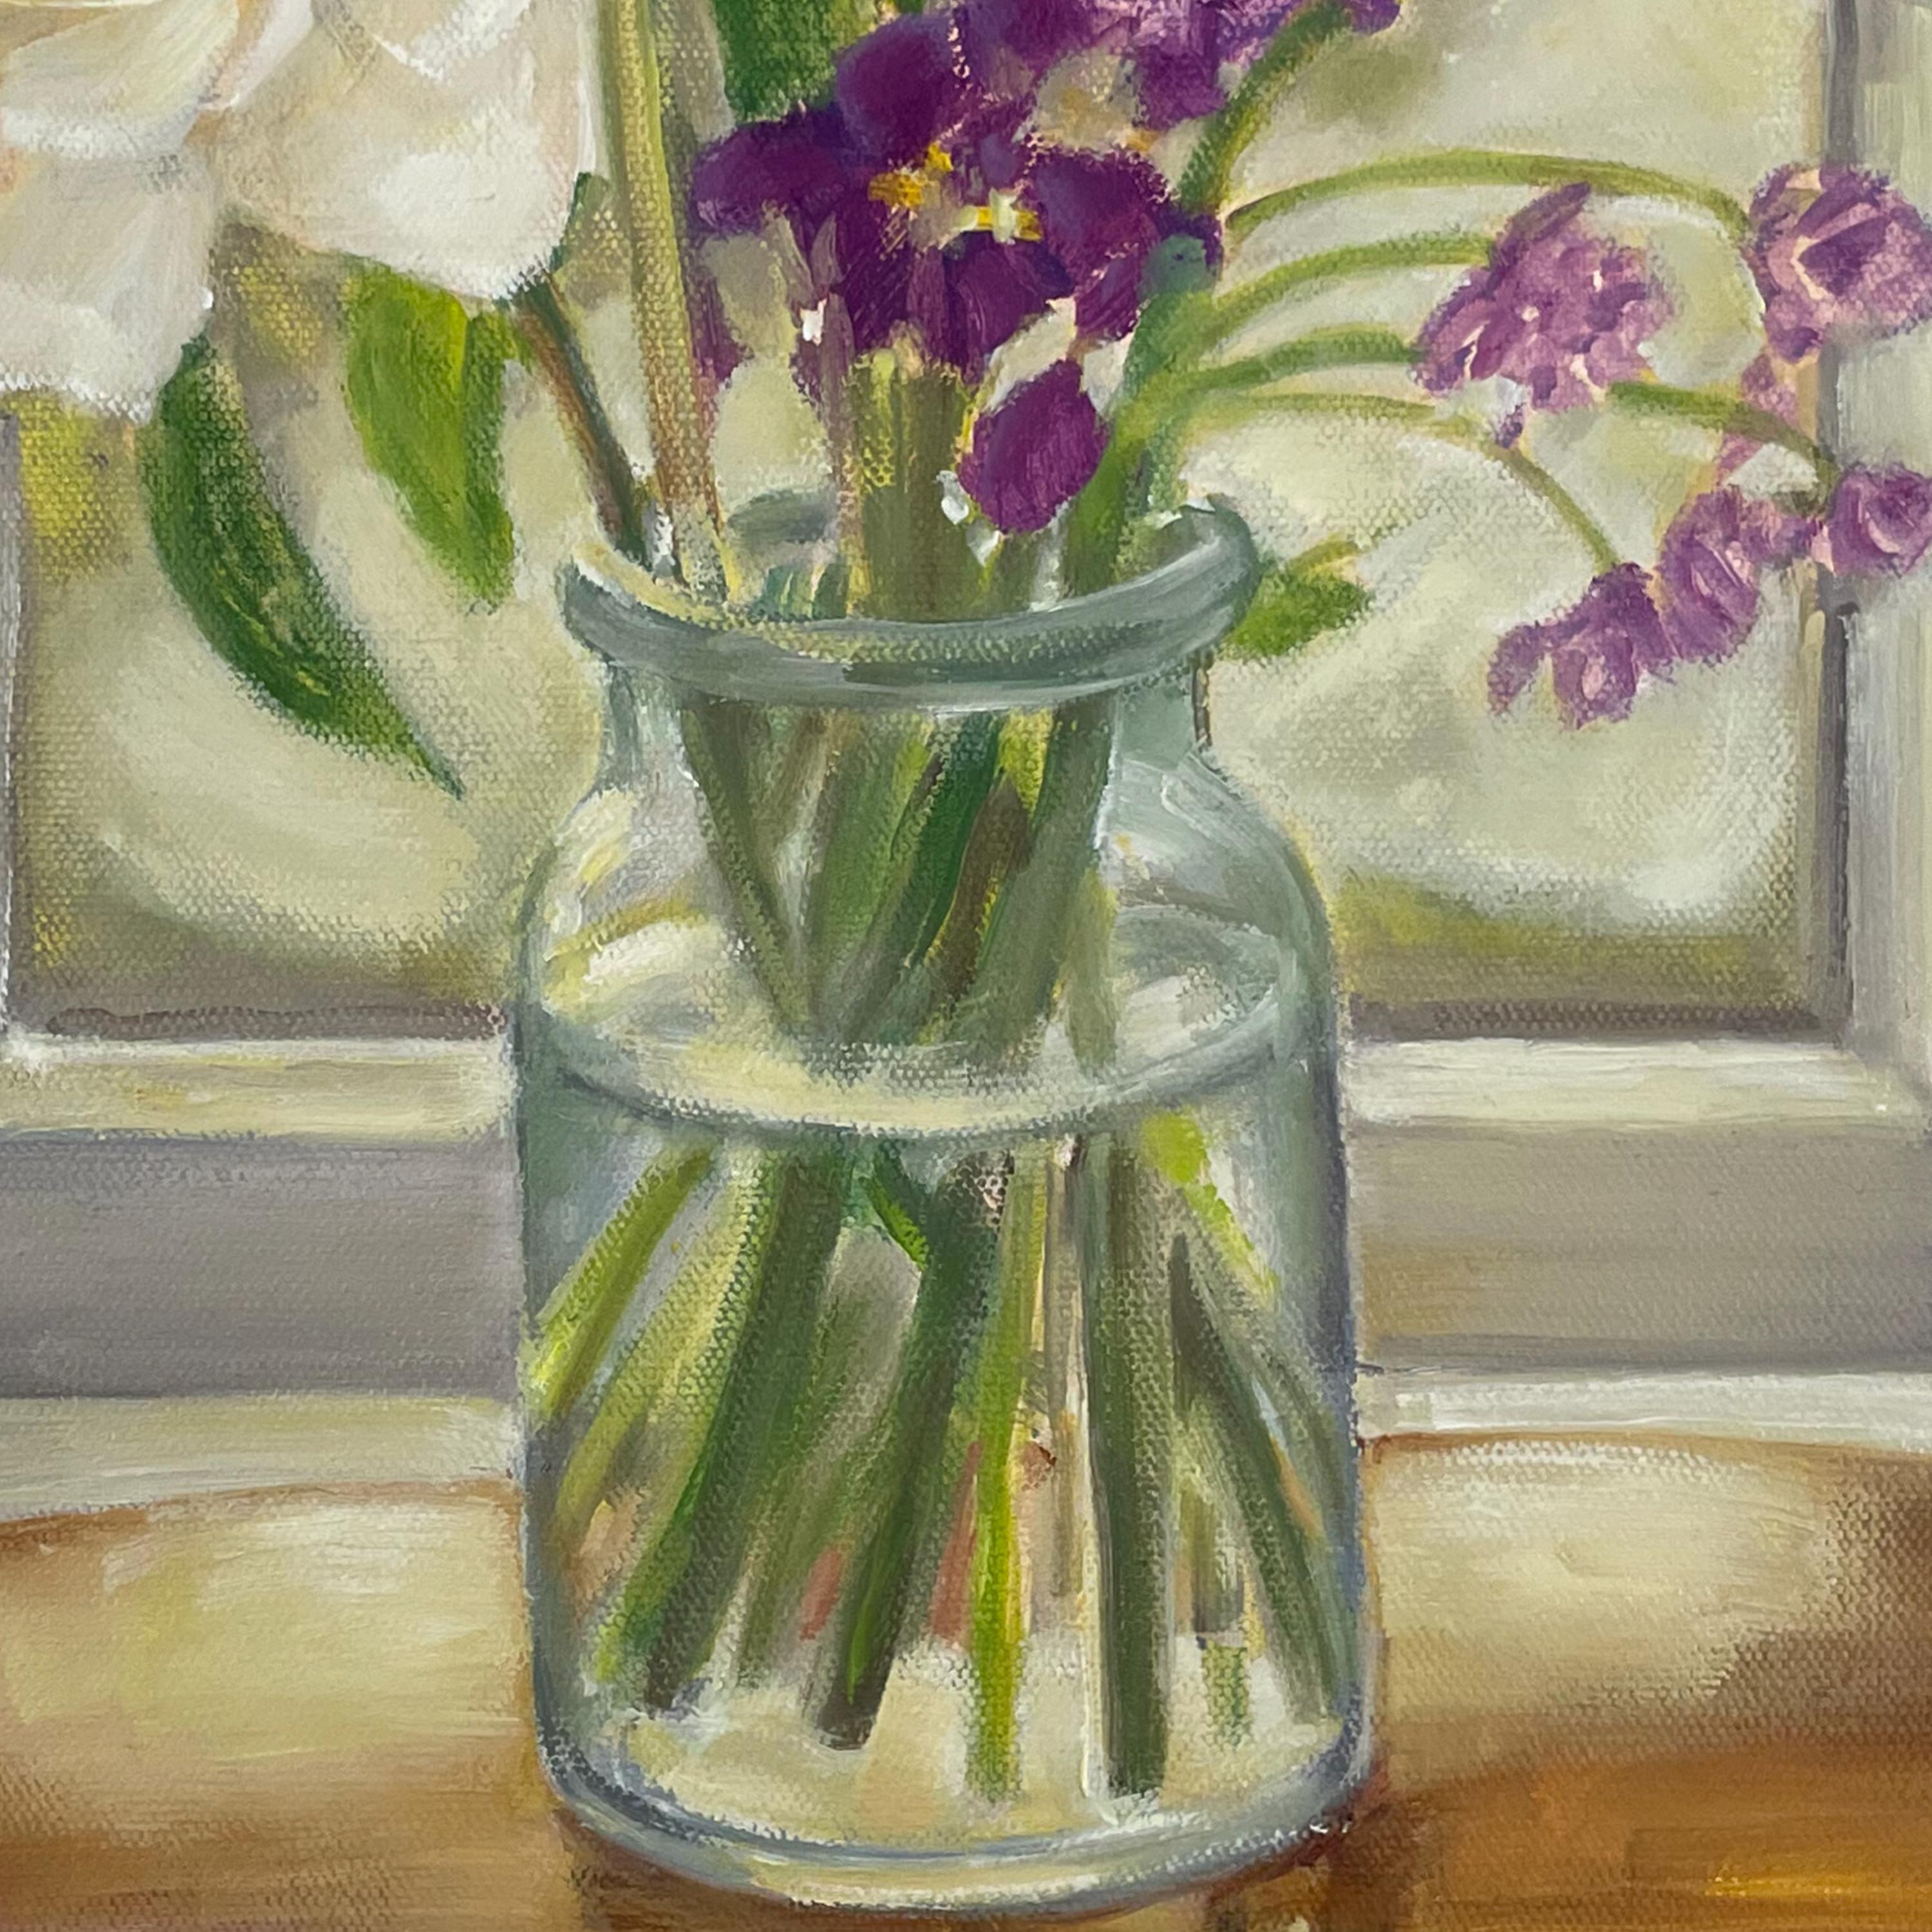 Wintry Mix, 2022, oil on canvas, floral still-life painting - Painting by Daisy Craddock